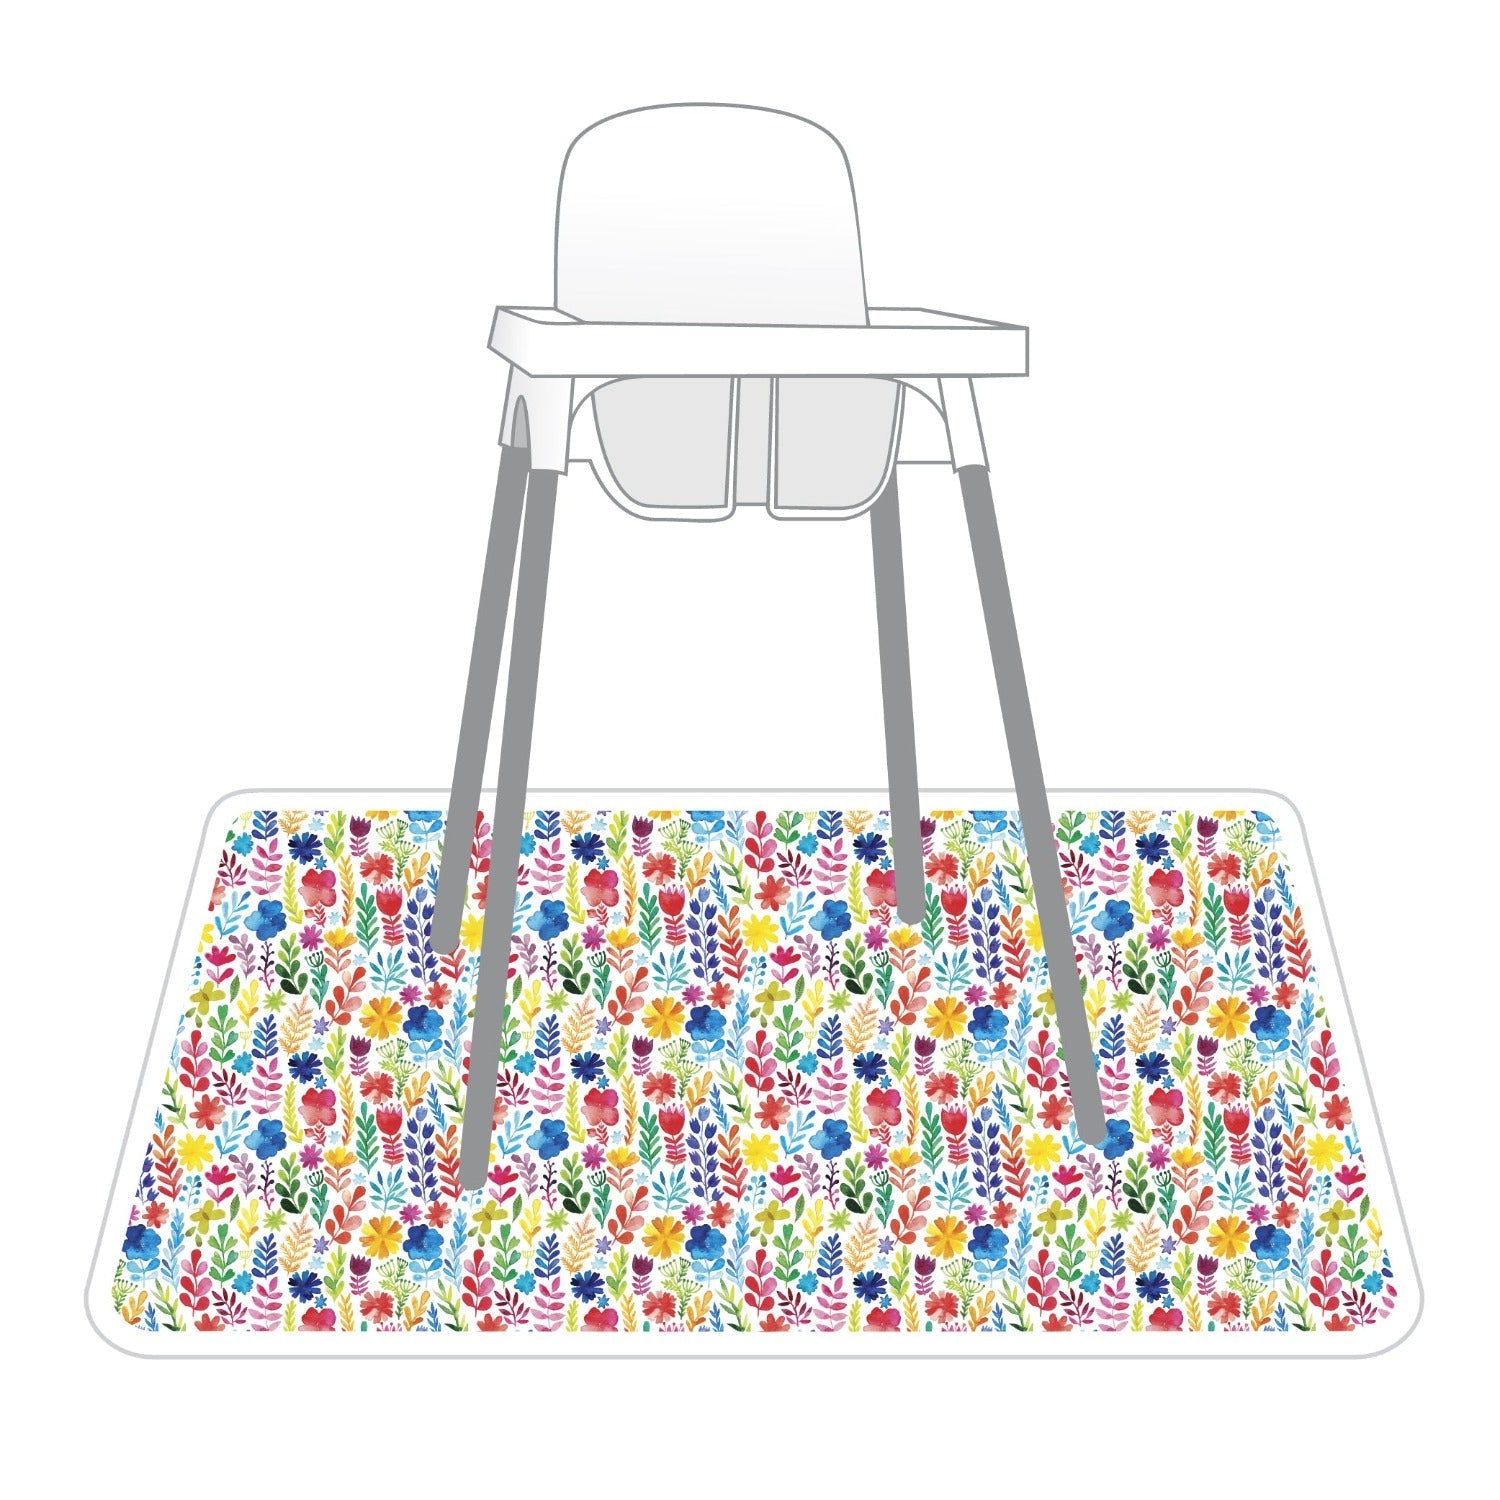 Rainbow Watercolor Floral Splash Mat - A Waterproof Catch-all For Highchair Spills And More!